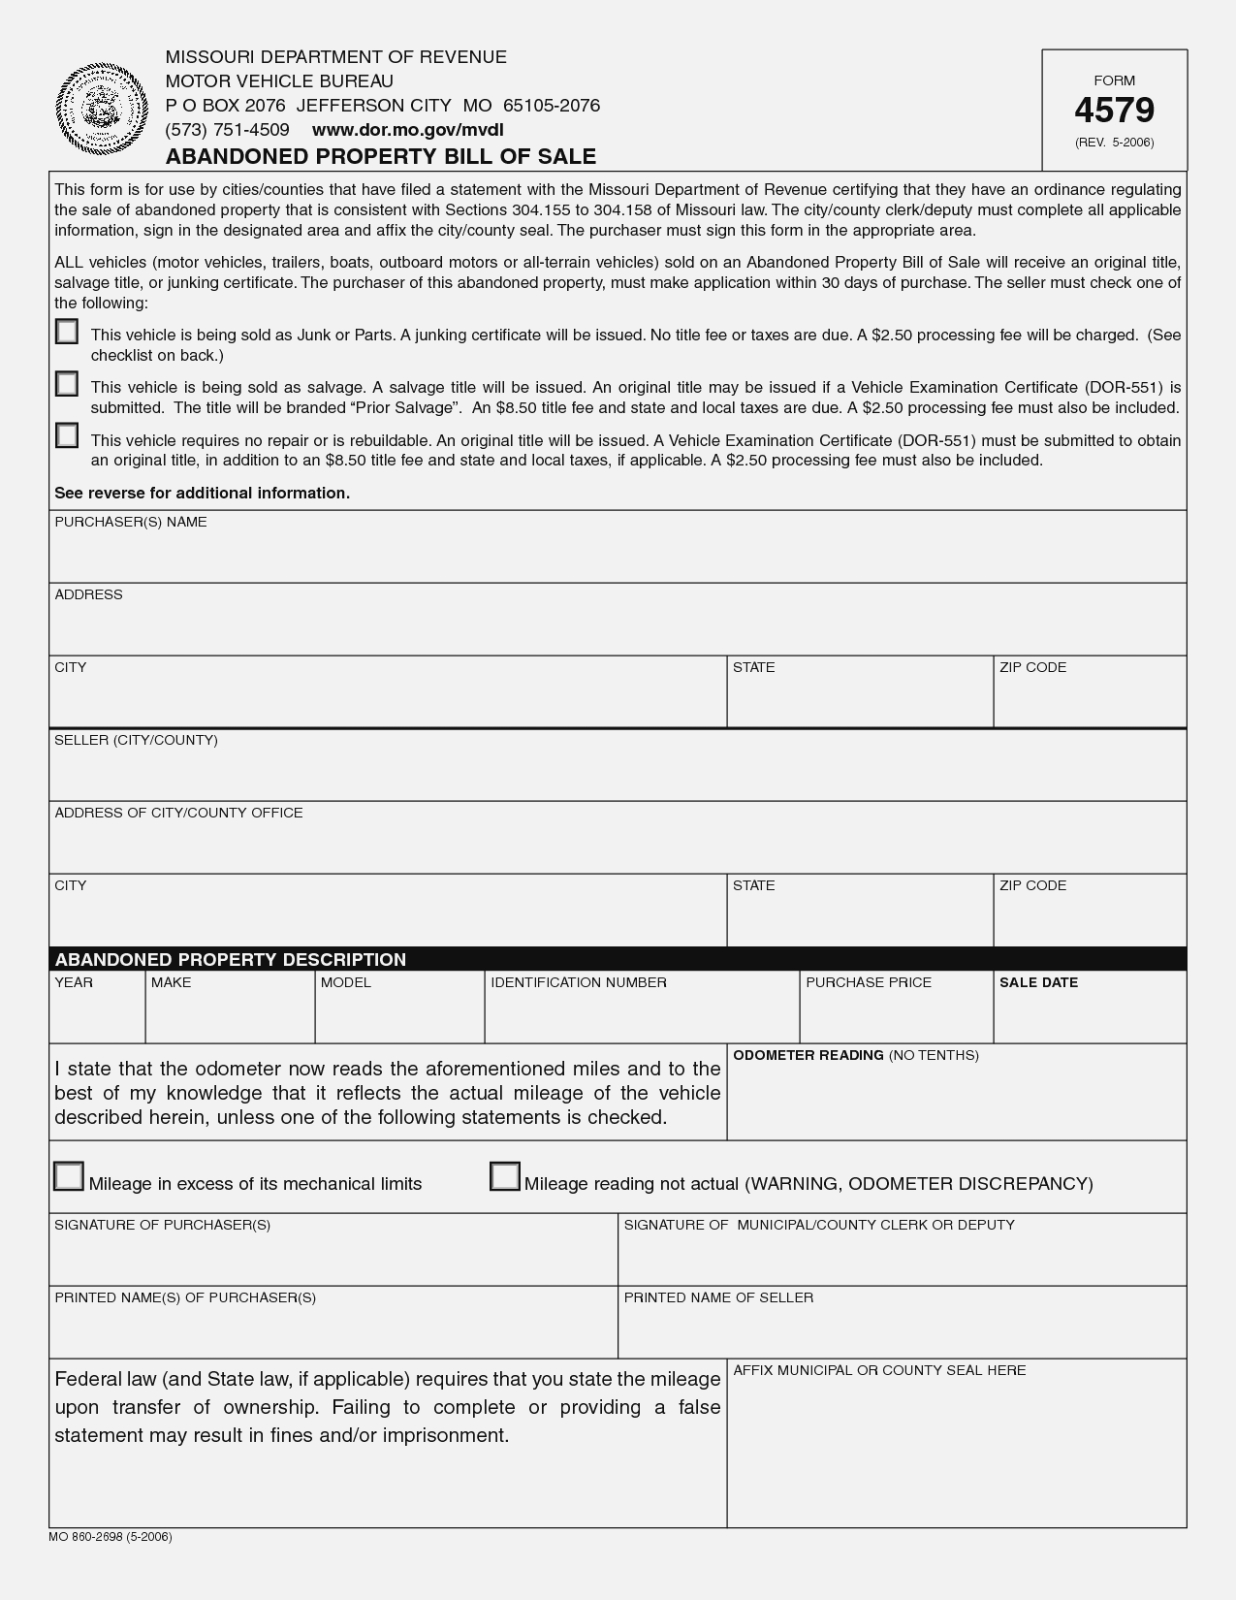 What You Know About Rmv | Realty Executives Mi : Invoice within Car Gift Letter Template